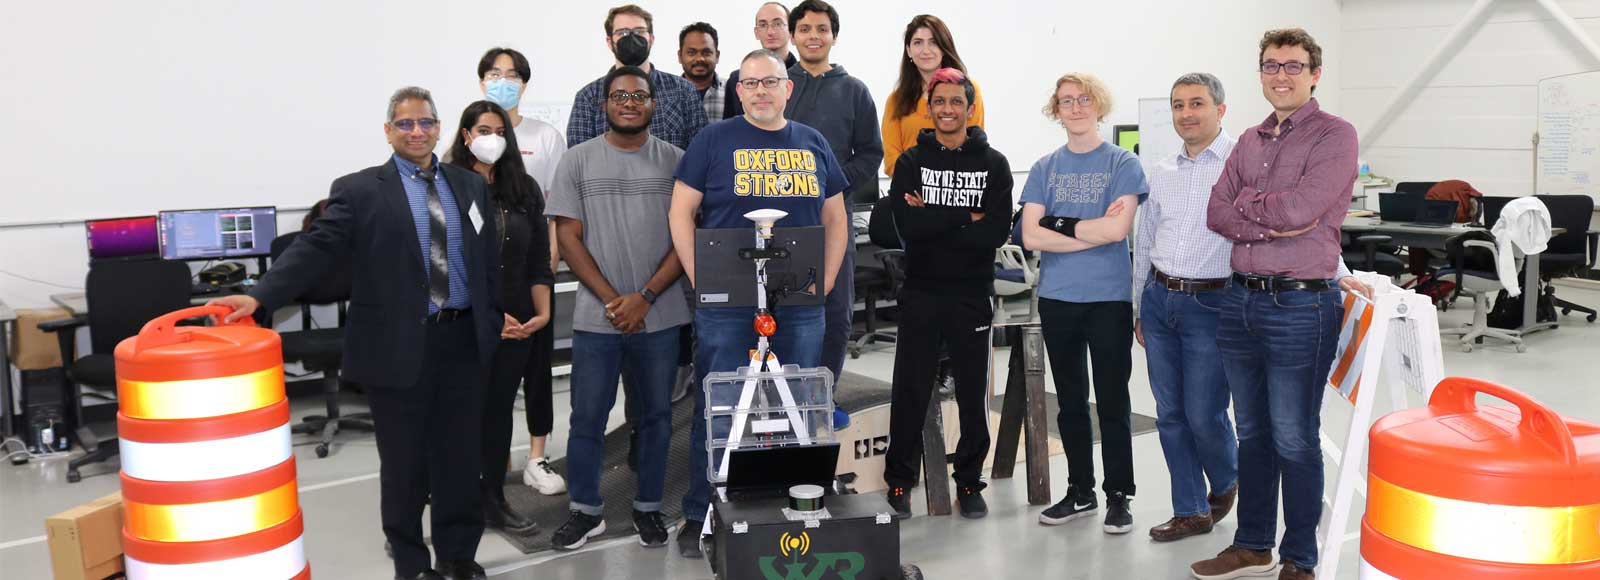 Members of the Warrior Robotics team with their robot in the lab